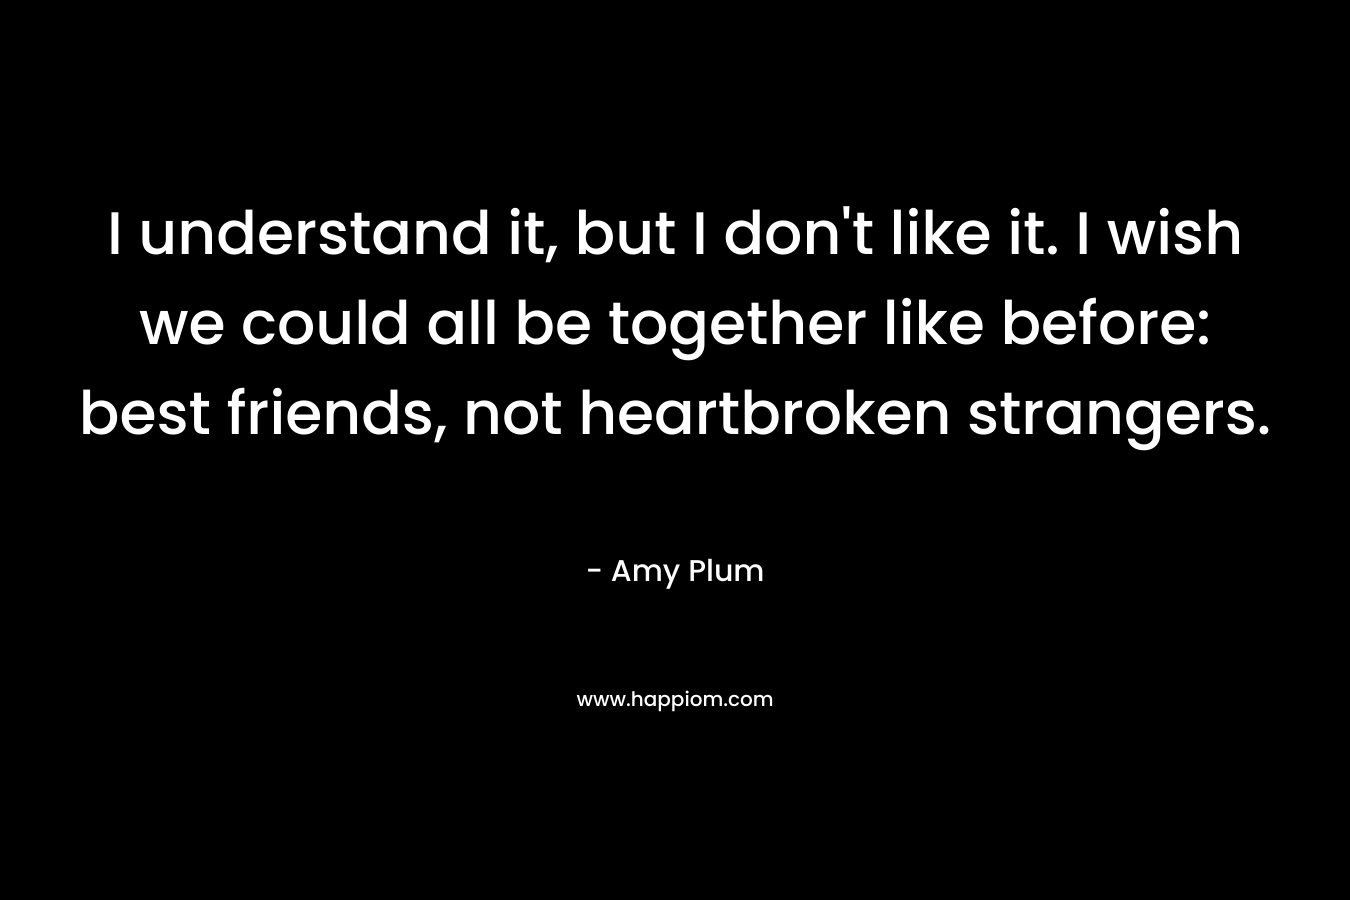 I understand it, but I don’t like it. I wish we could all be together like before: best friends, not heartbroken strangers. – Amy Plum